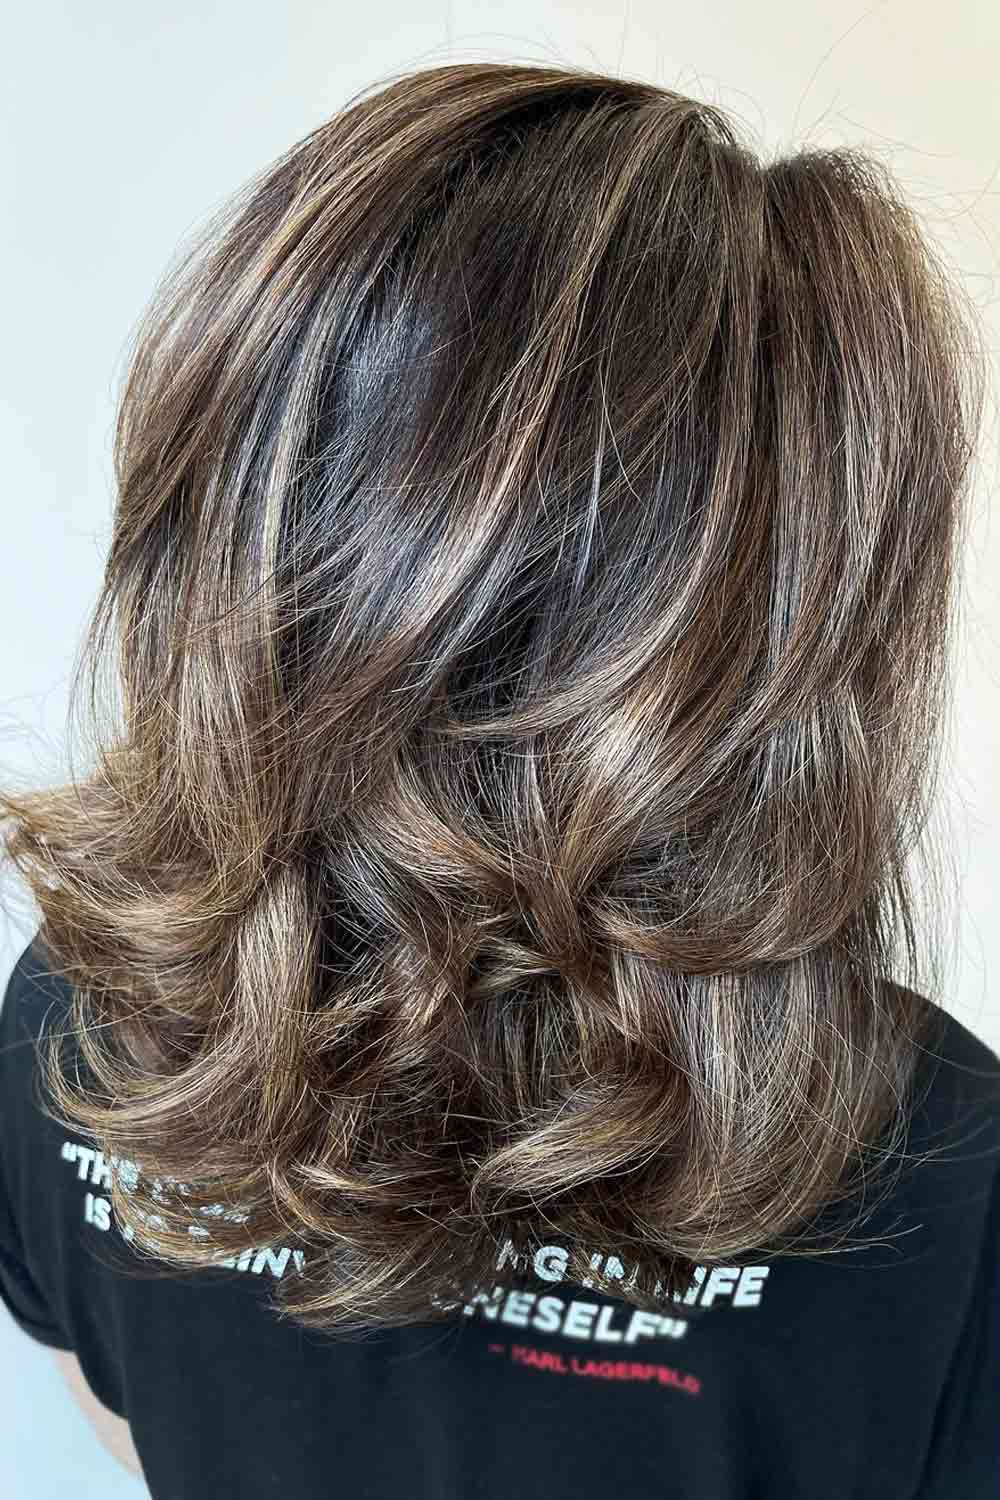 Mid-length Two-tier for Thick Hair #layeredhaircuts #layeredhair #haircuts